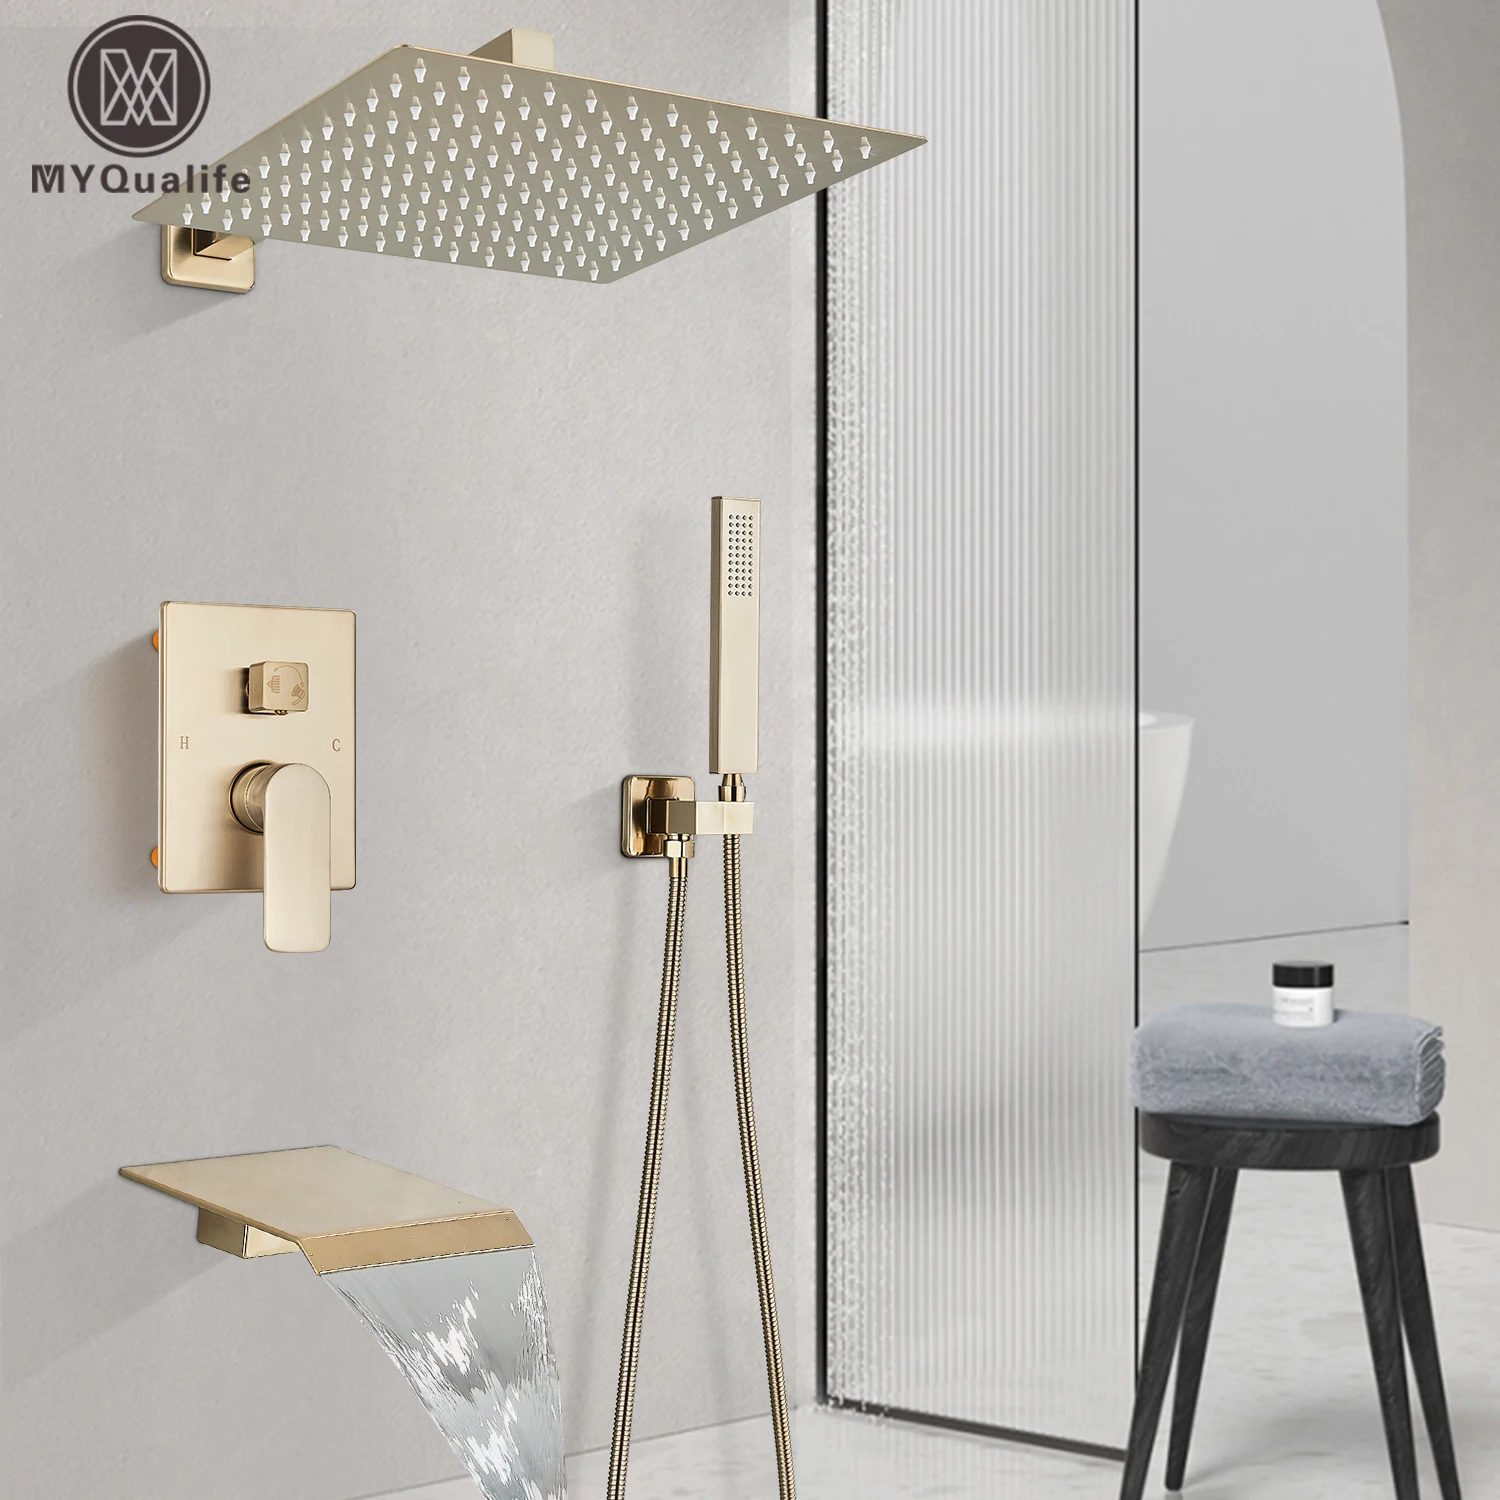 

Brushed Gold Bathroom Shower Faucet Set 2/3 Way Rainfall Bathtub Mixer Hot Cold Water Mixed Tap Wall Mounted Embedded Box